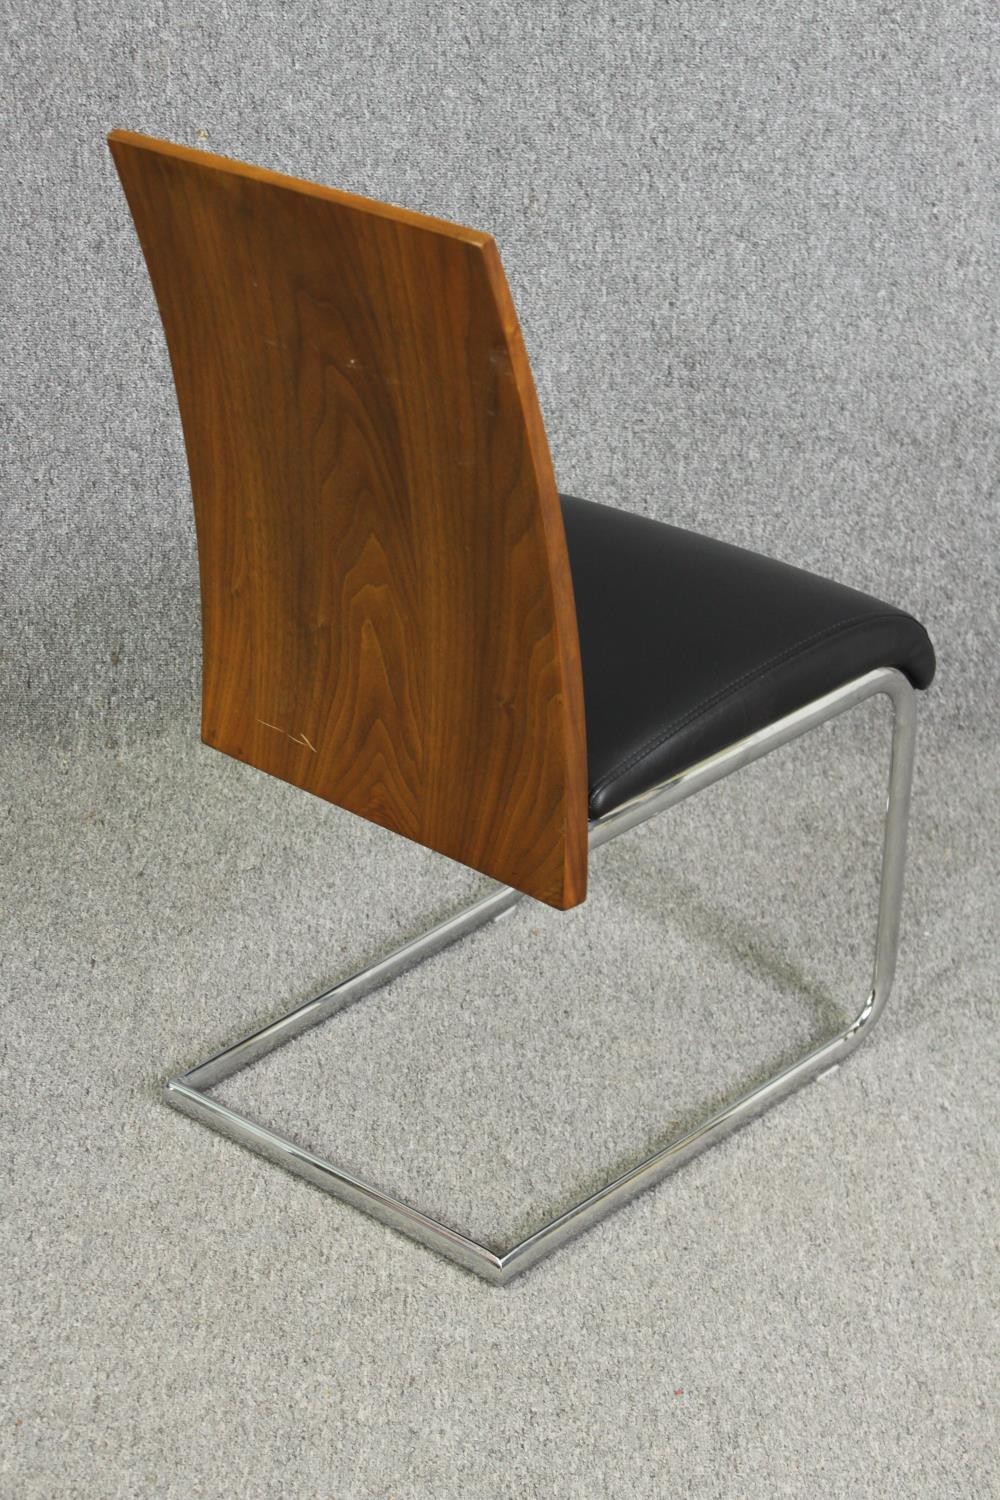 Dining chairs, a set of six, contemporary, chrome and leather upholstered. - Image 4 of 7